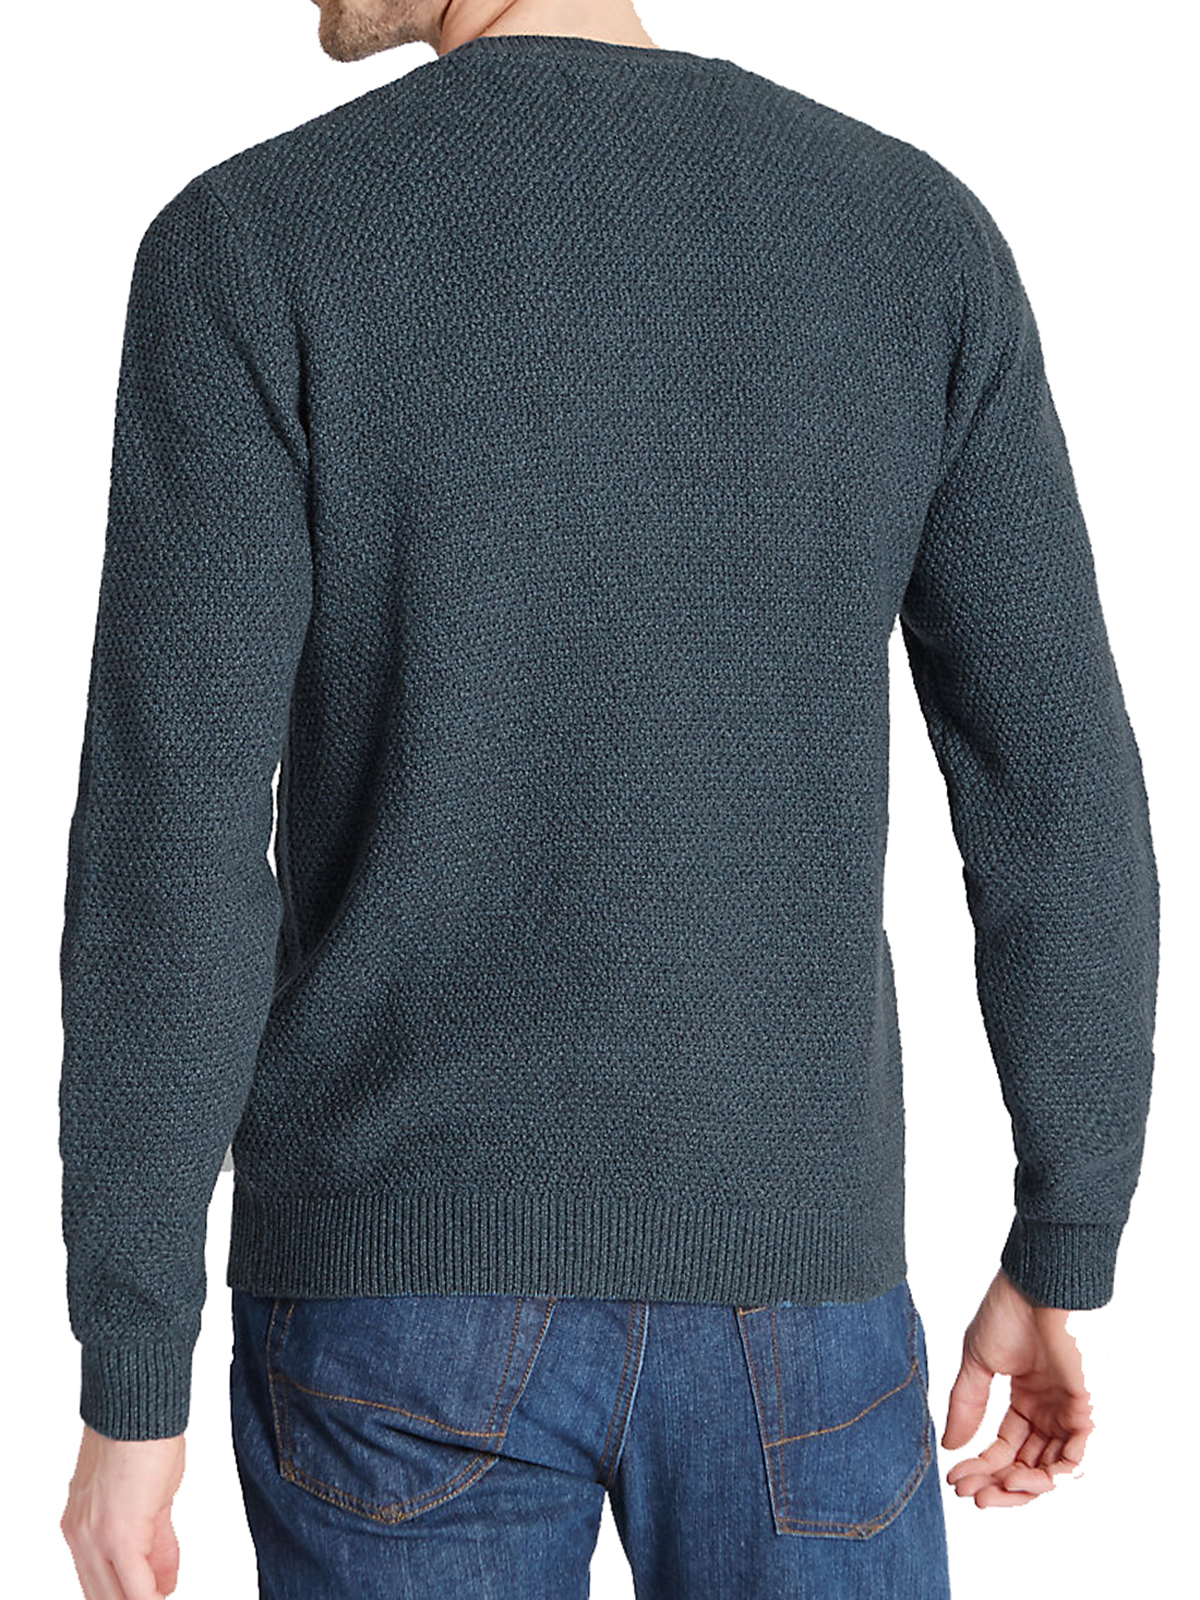 Marks and Spencer - - M&5 TEAL Pure Cotton Textured Jumper - Size ...